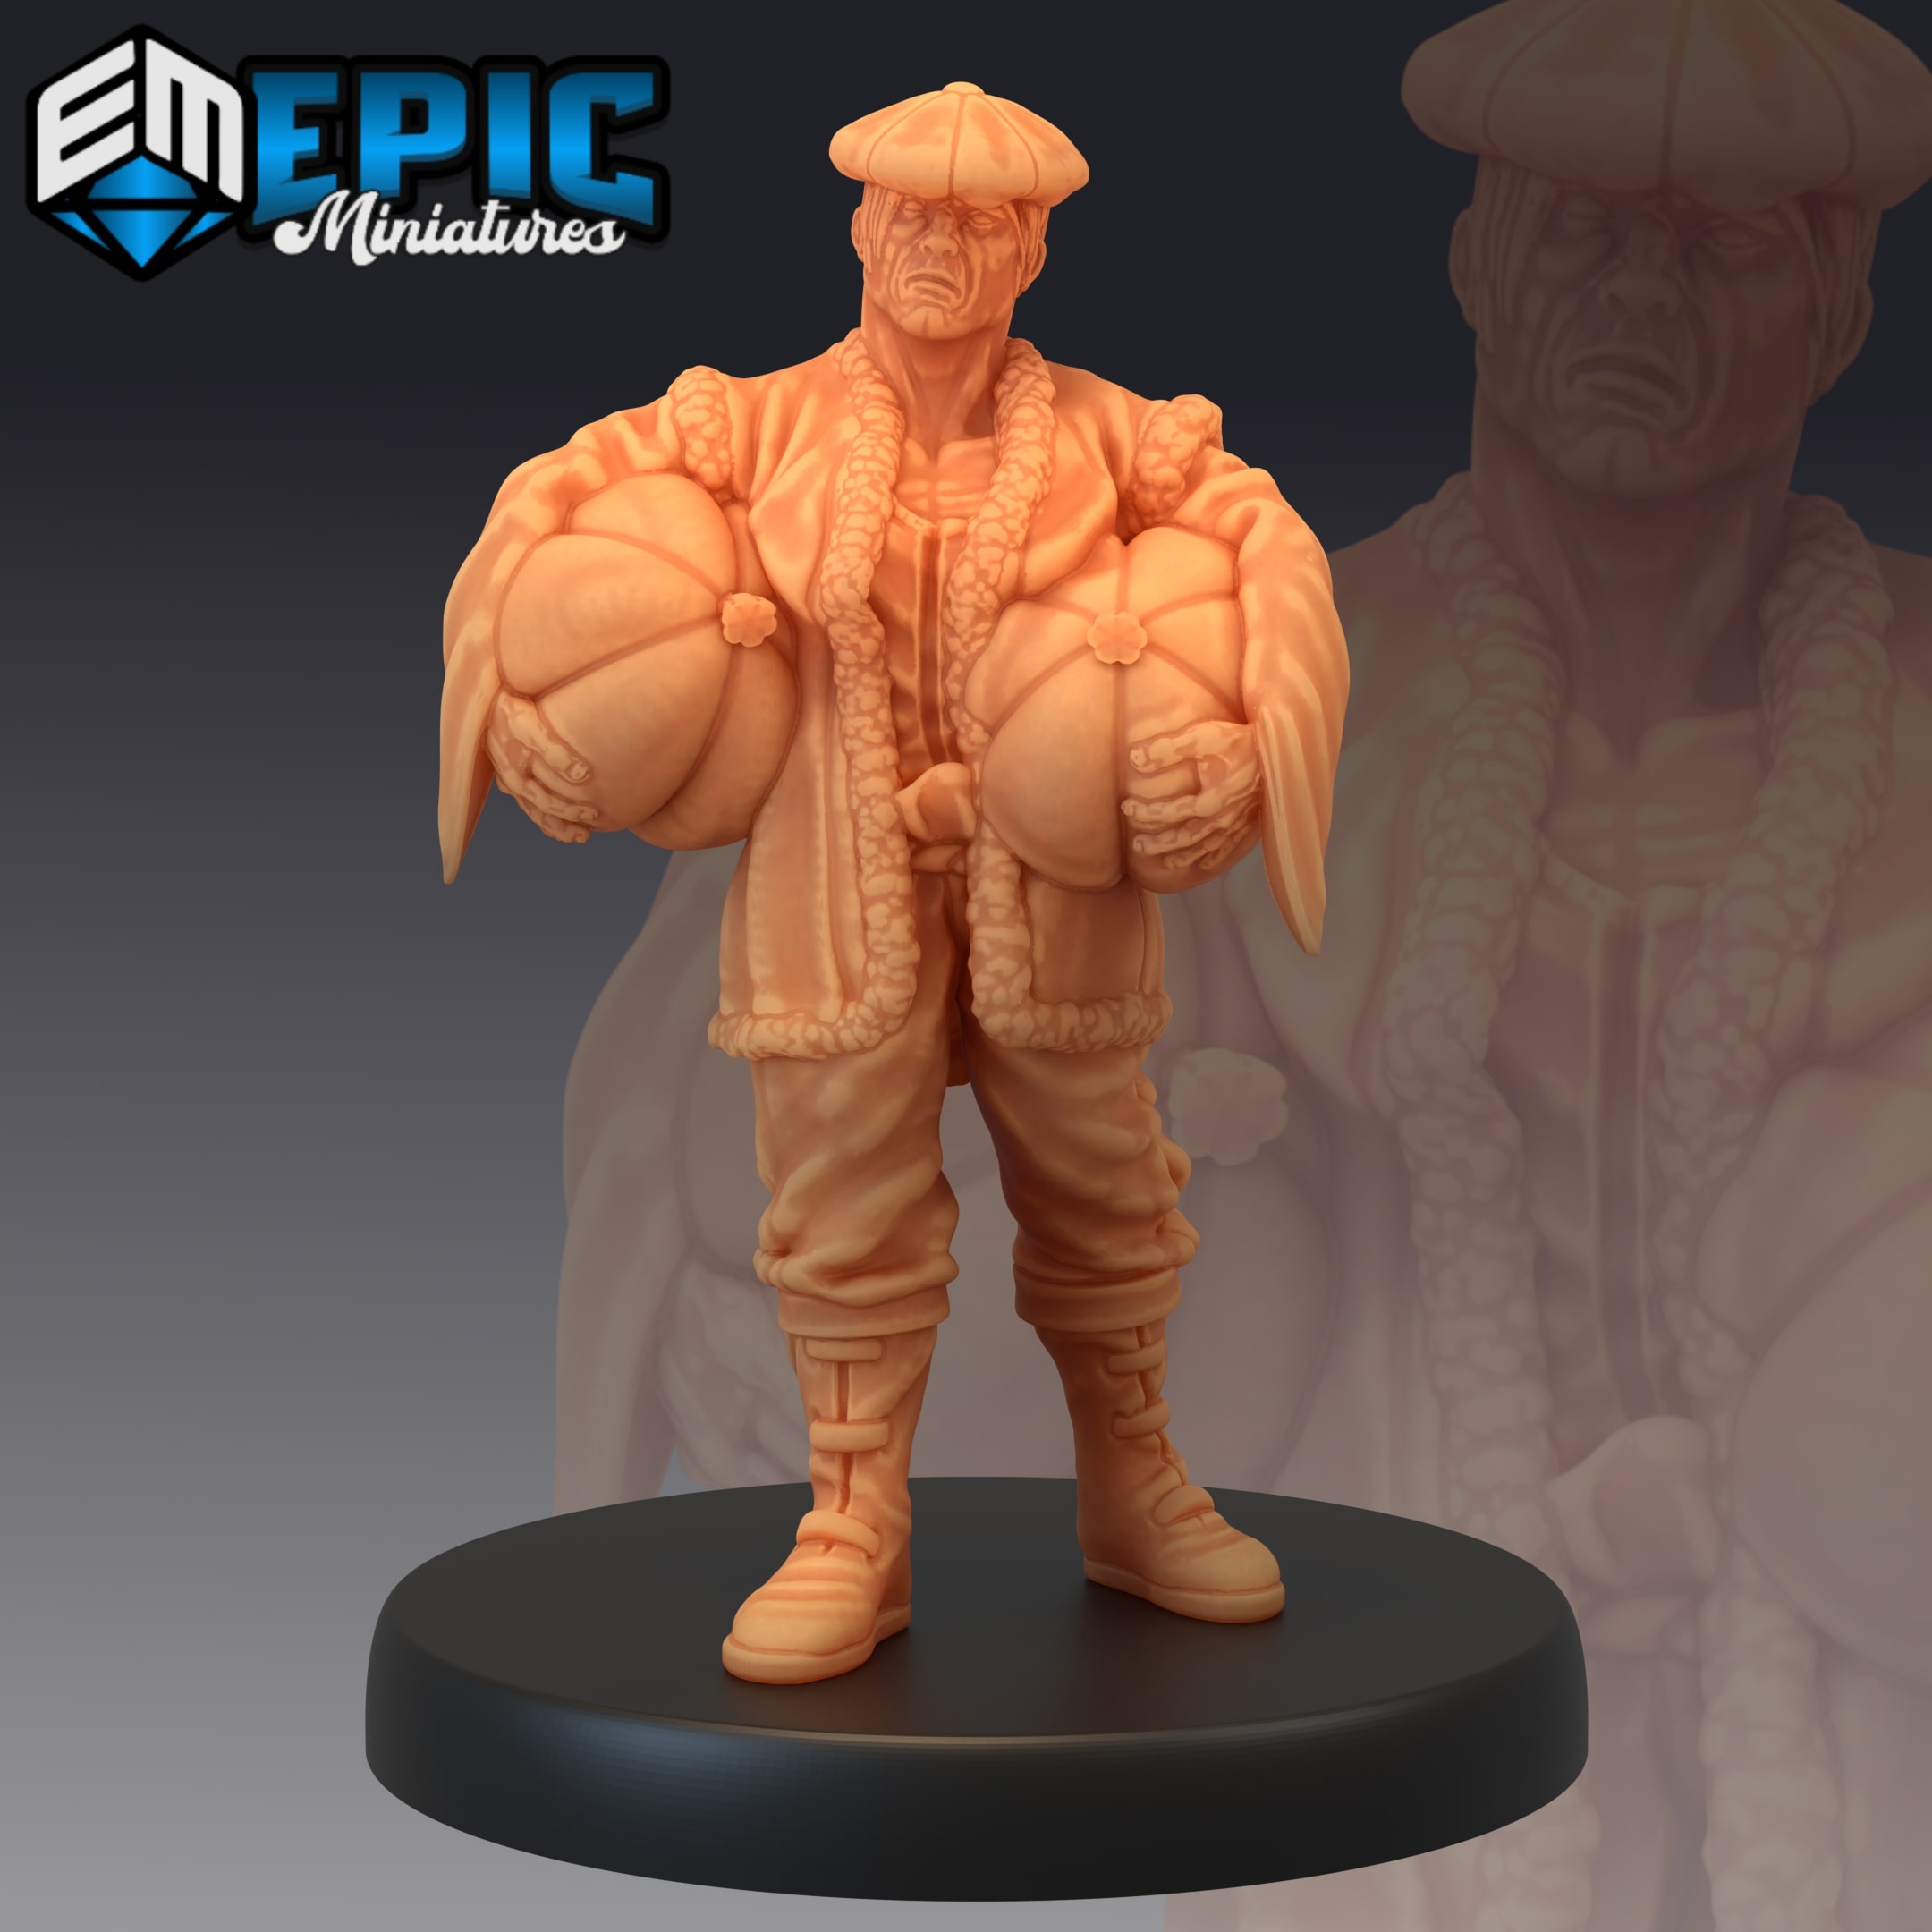 Human characters designed by epic miniatures